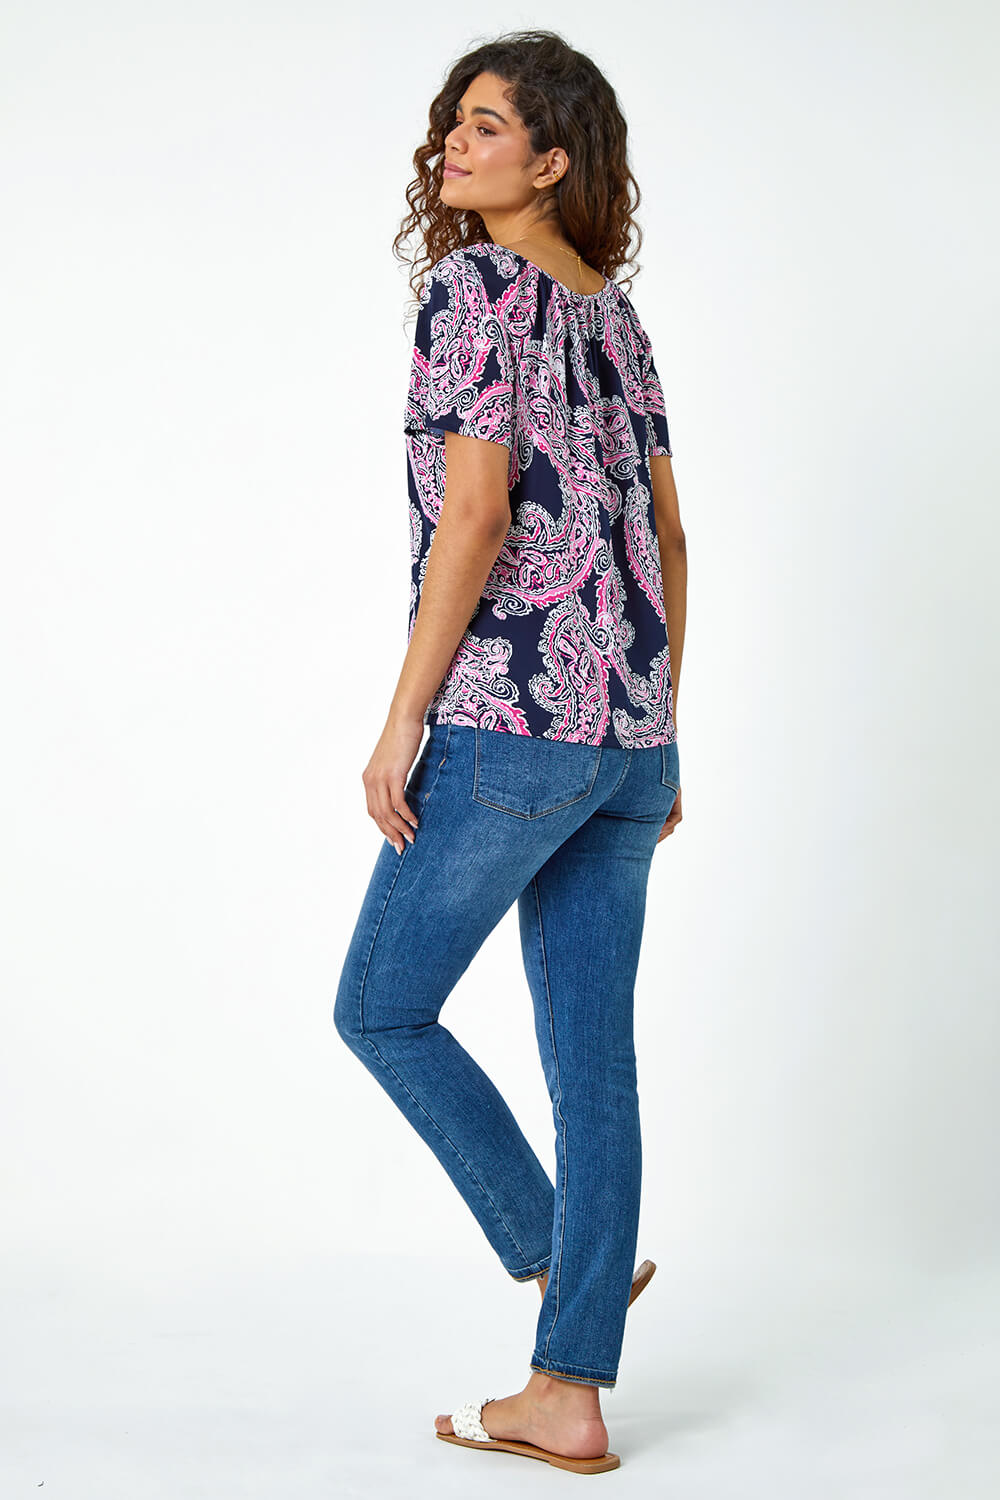 PINK Textured Paisley Print Stretch T-Shirt, Image 3 of 5